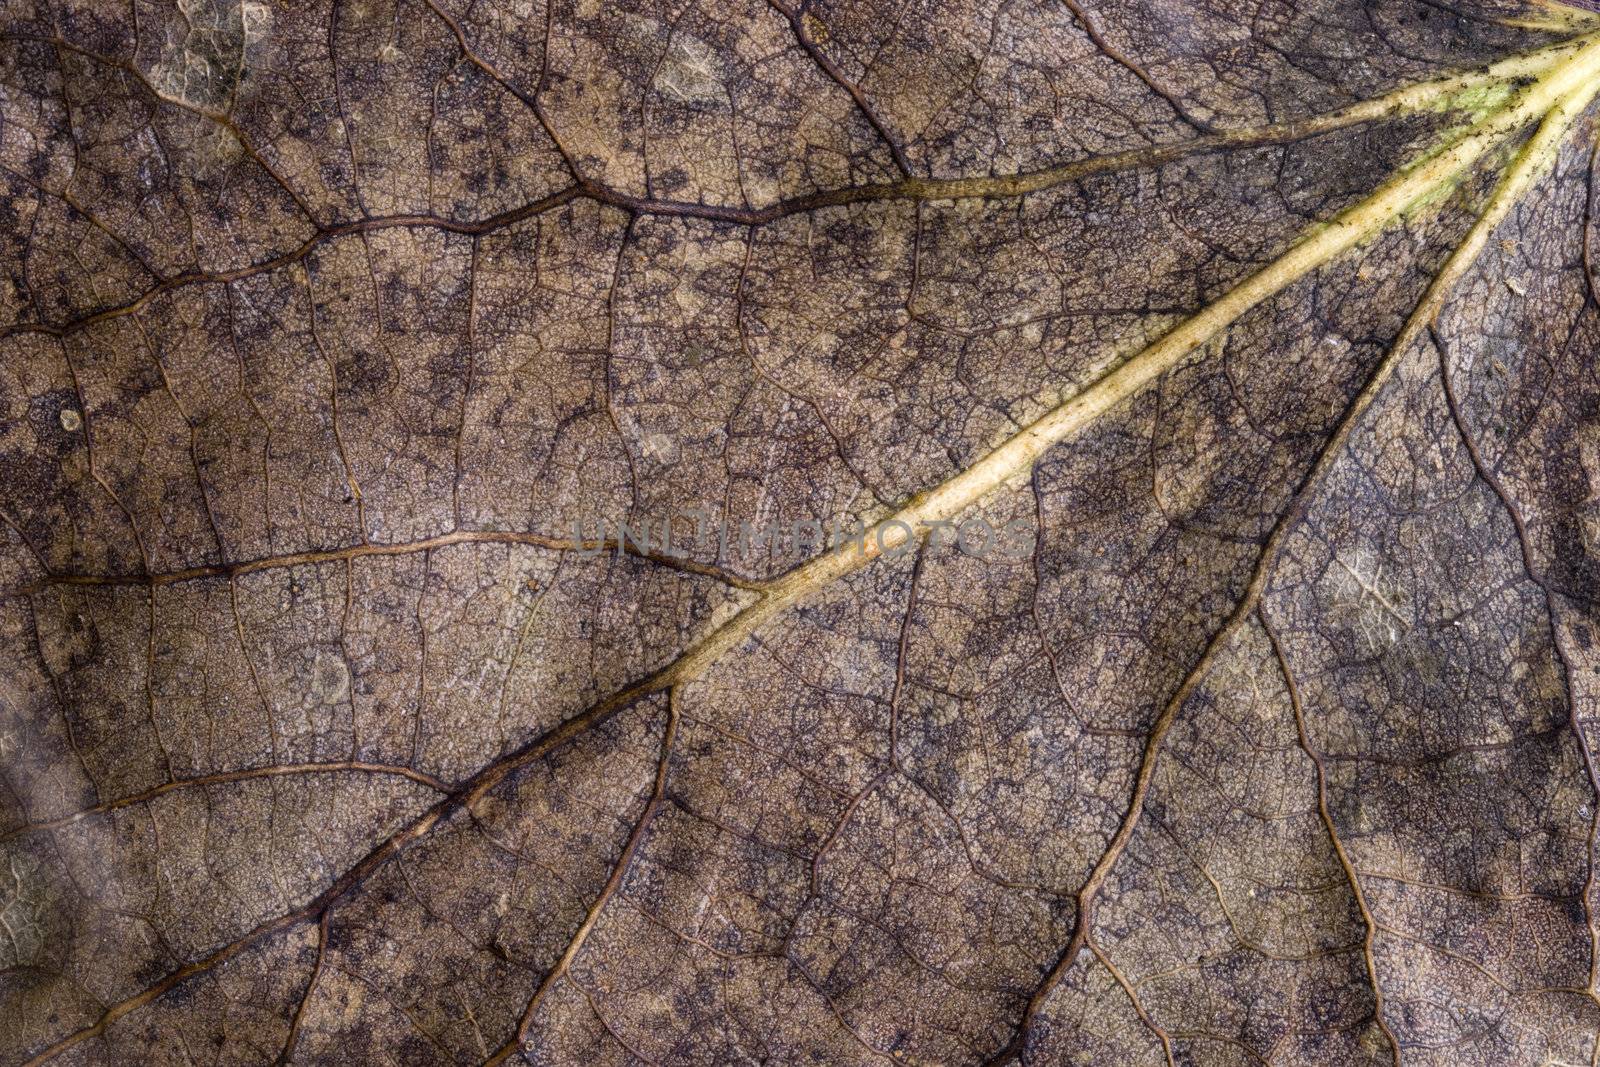 A leaf found on the ground having just fell in Autumn